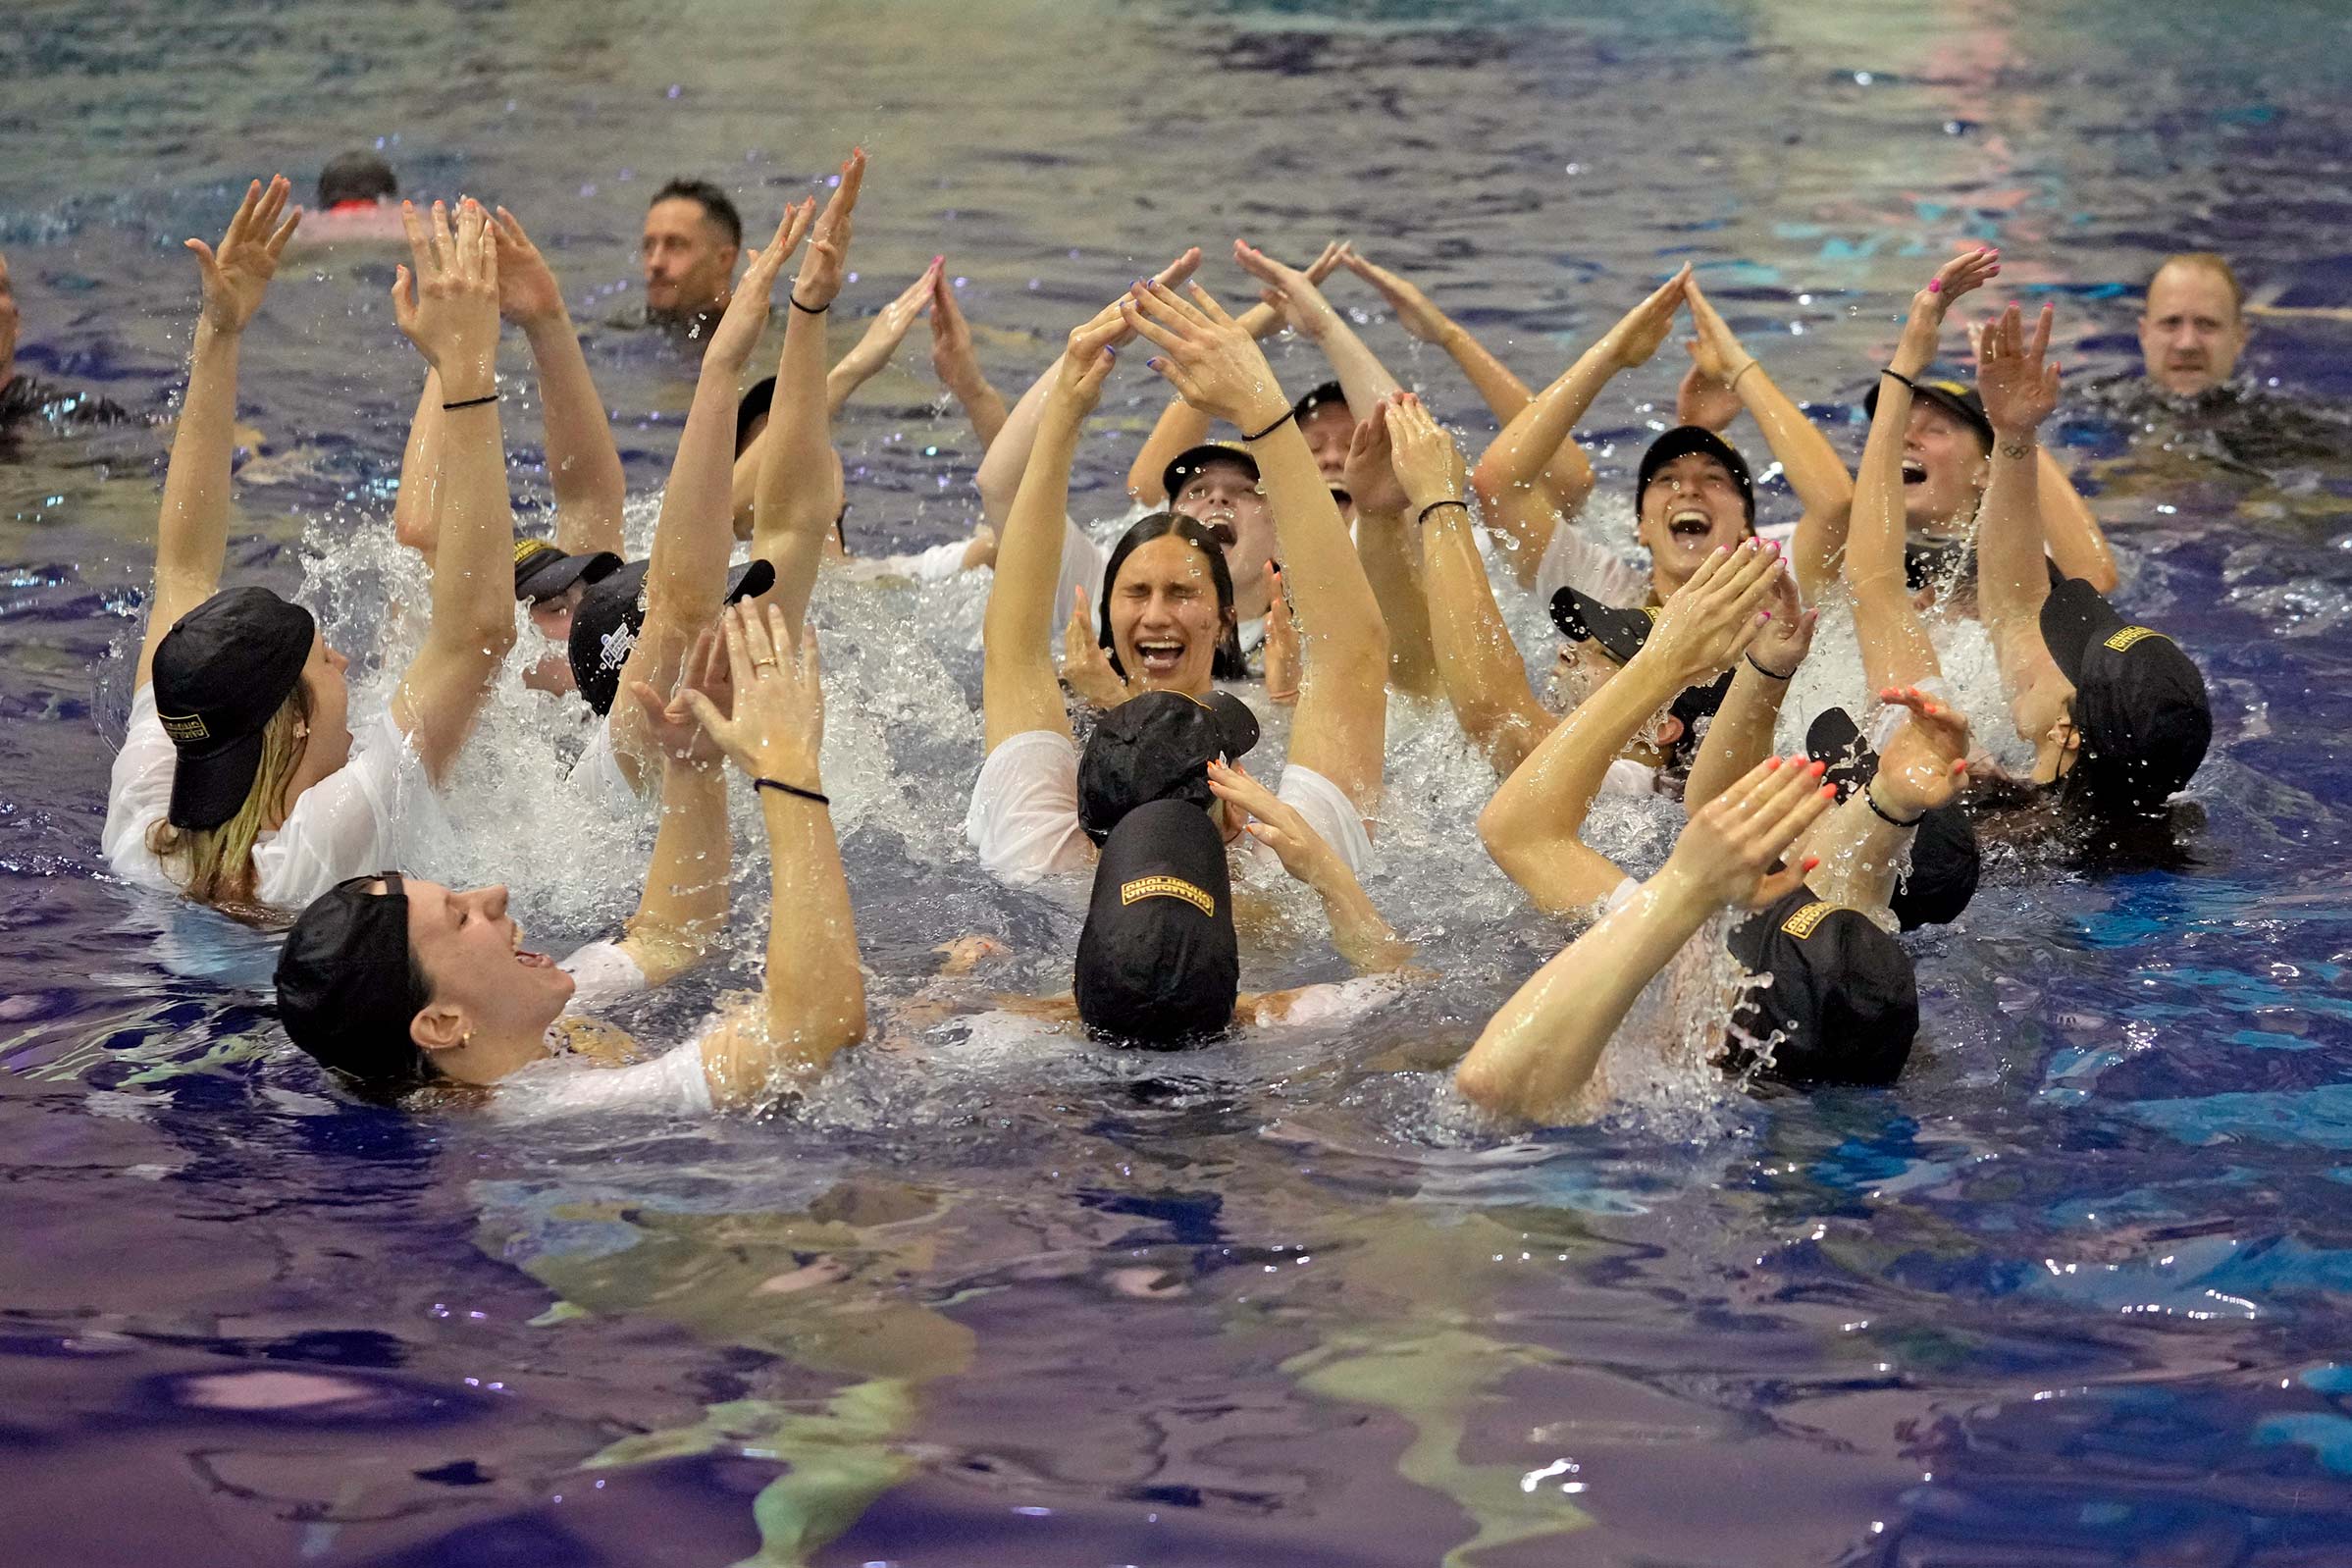 A group of University of Virginia swimmers in a pool wearing baseball caps and t-shirts smiling and raising their hands